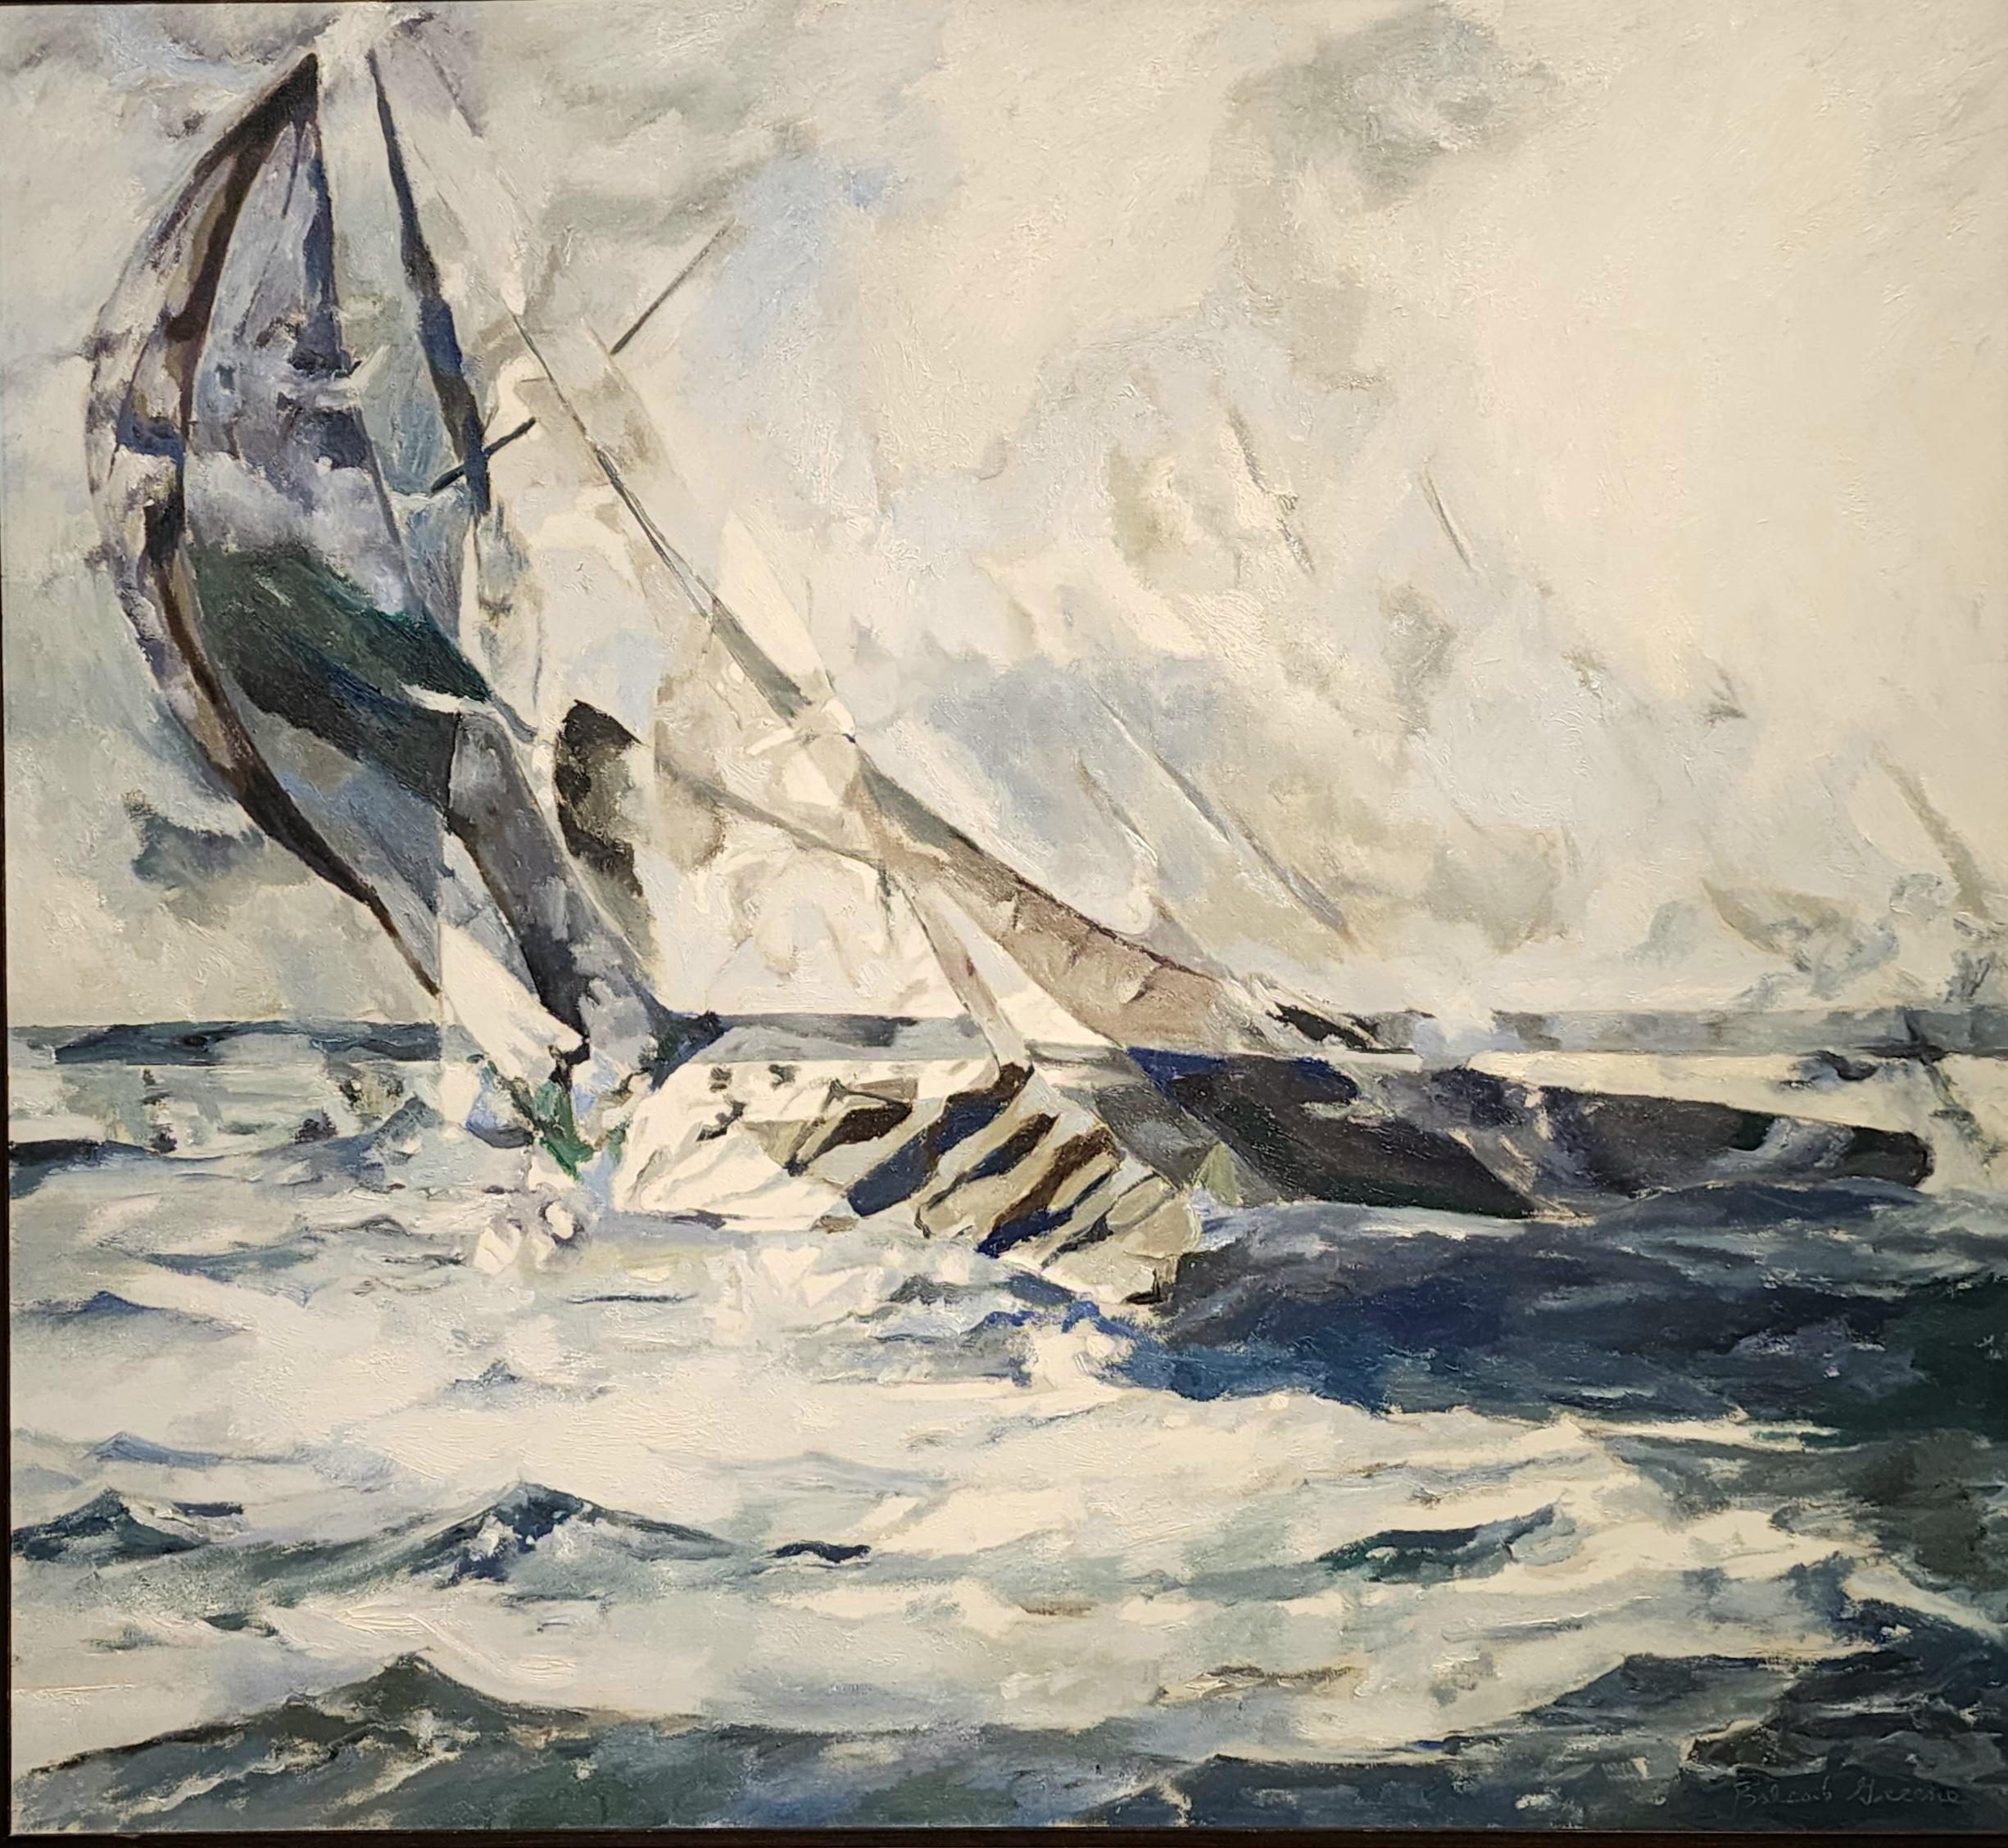 The Squall by Balcomb Greene painted in 1963. Signed on the front titled and dated on the reverse.
Paintings of ships by Balcomb Greene are few and far between. This painting likely created at his Studio in Montauk New York or possibly while